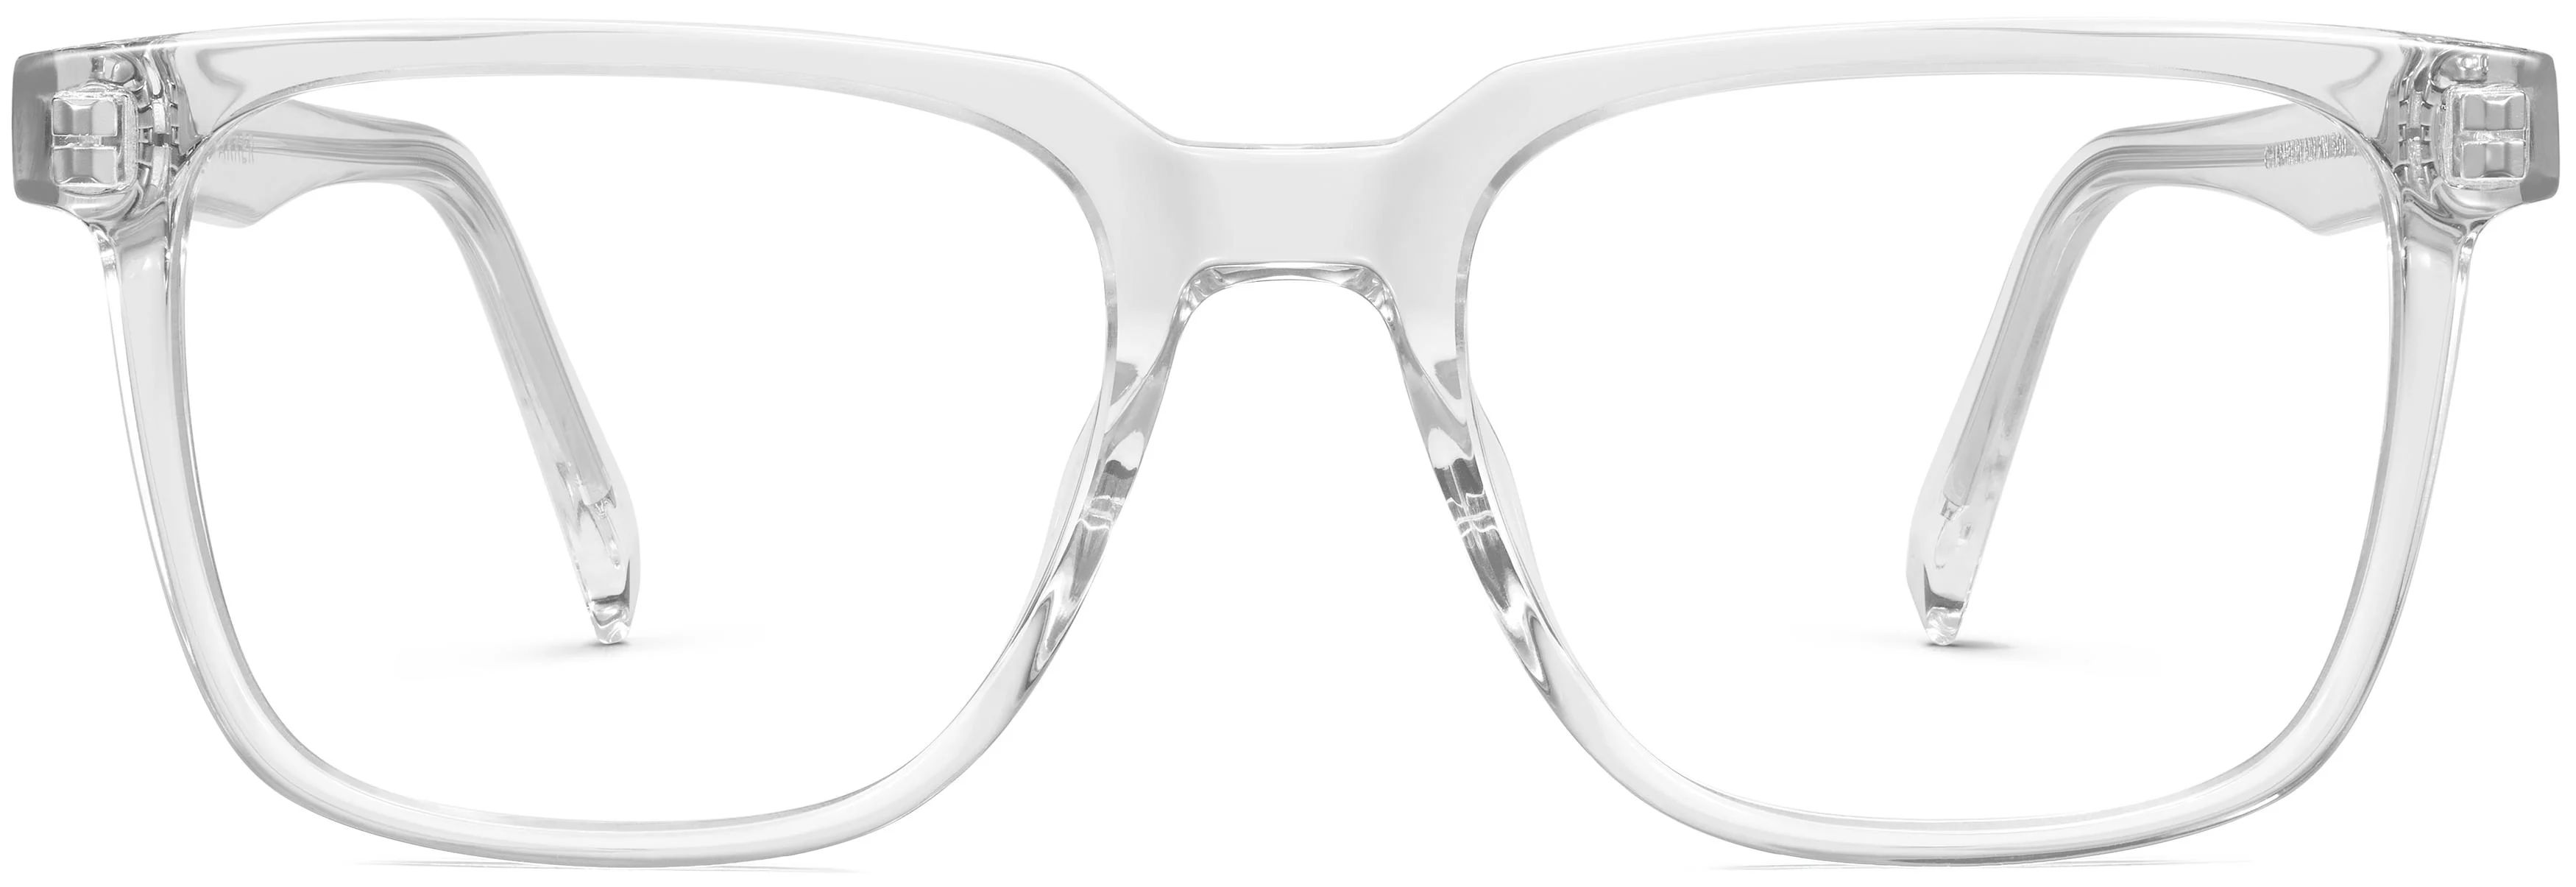 Chamberlain Eyeglasses in Crystal | Warby Parker | Warby Parker (US)